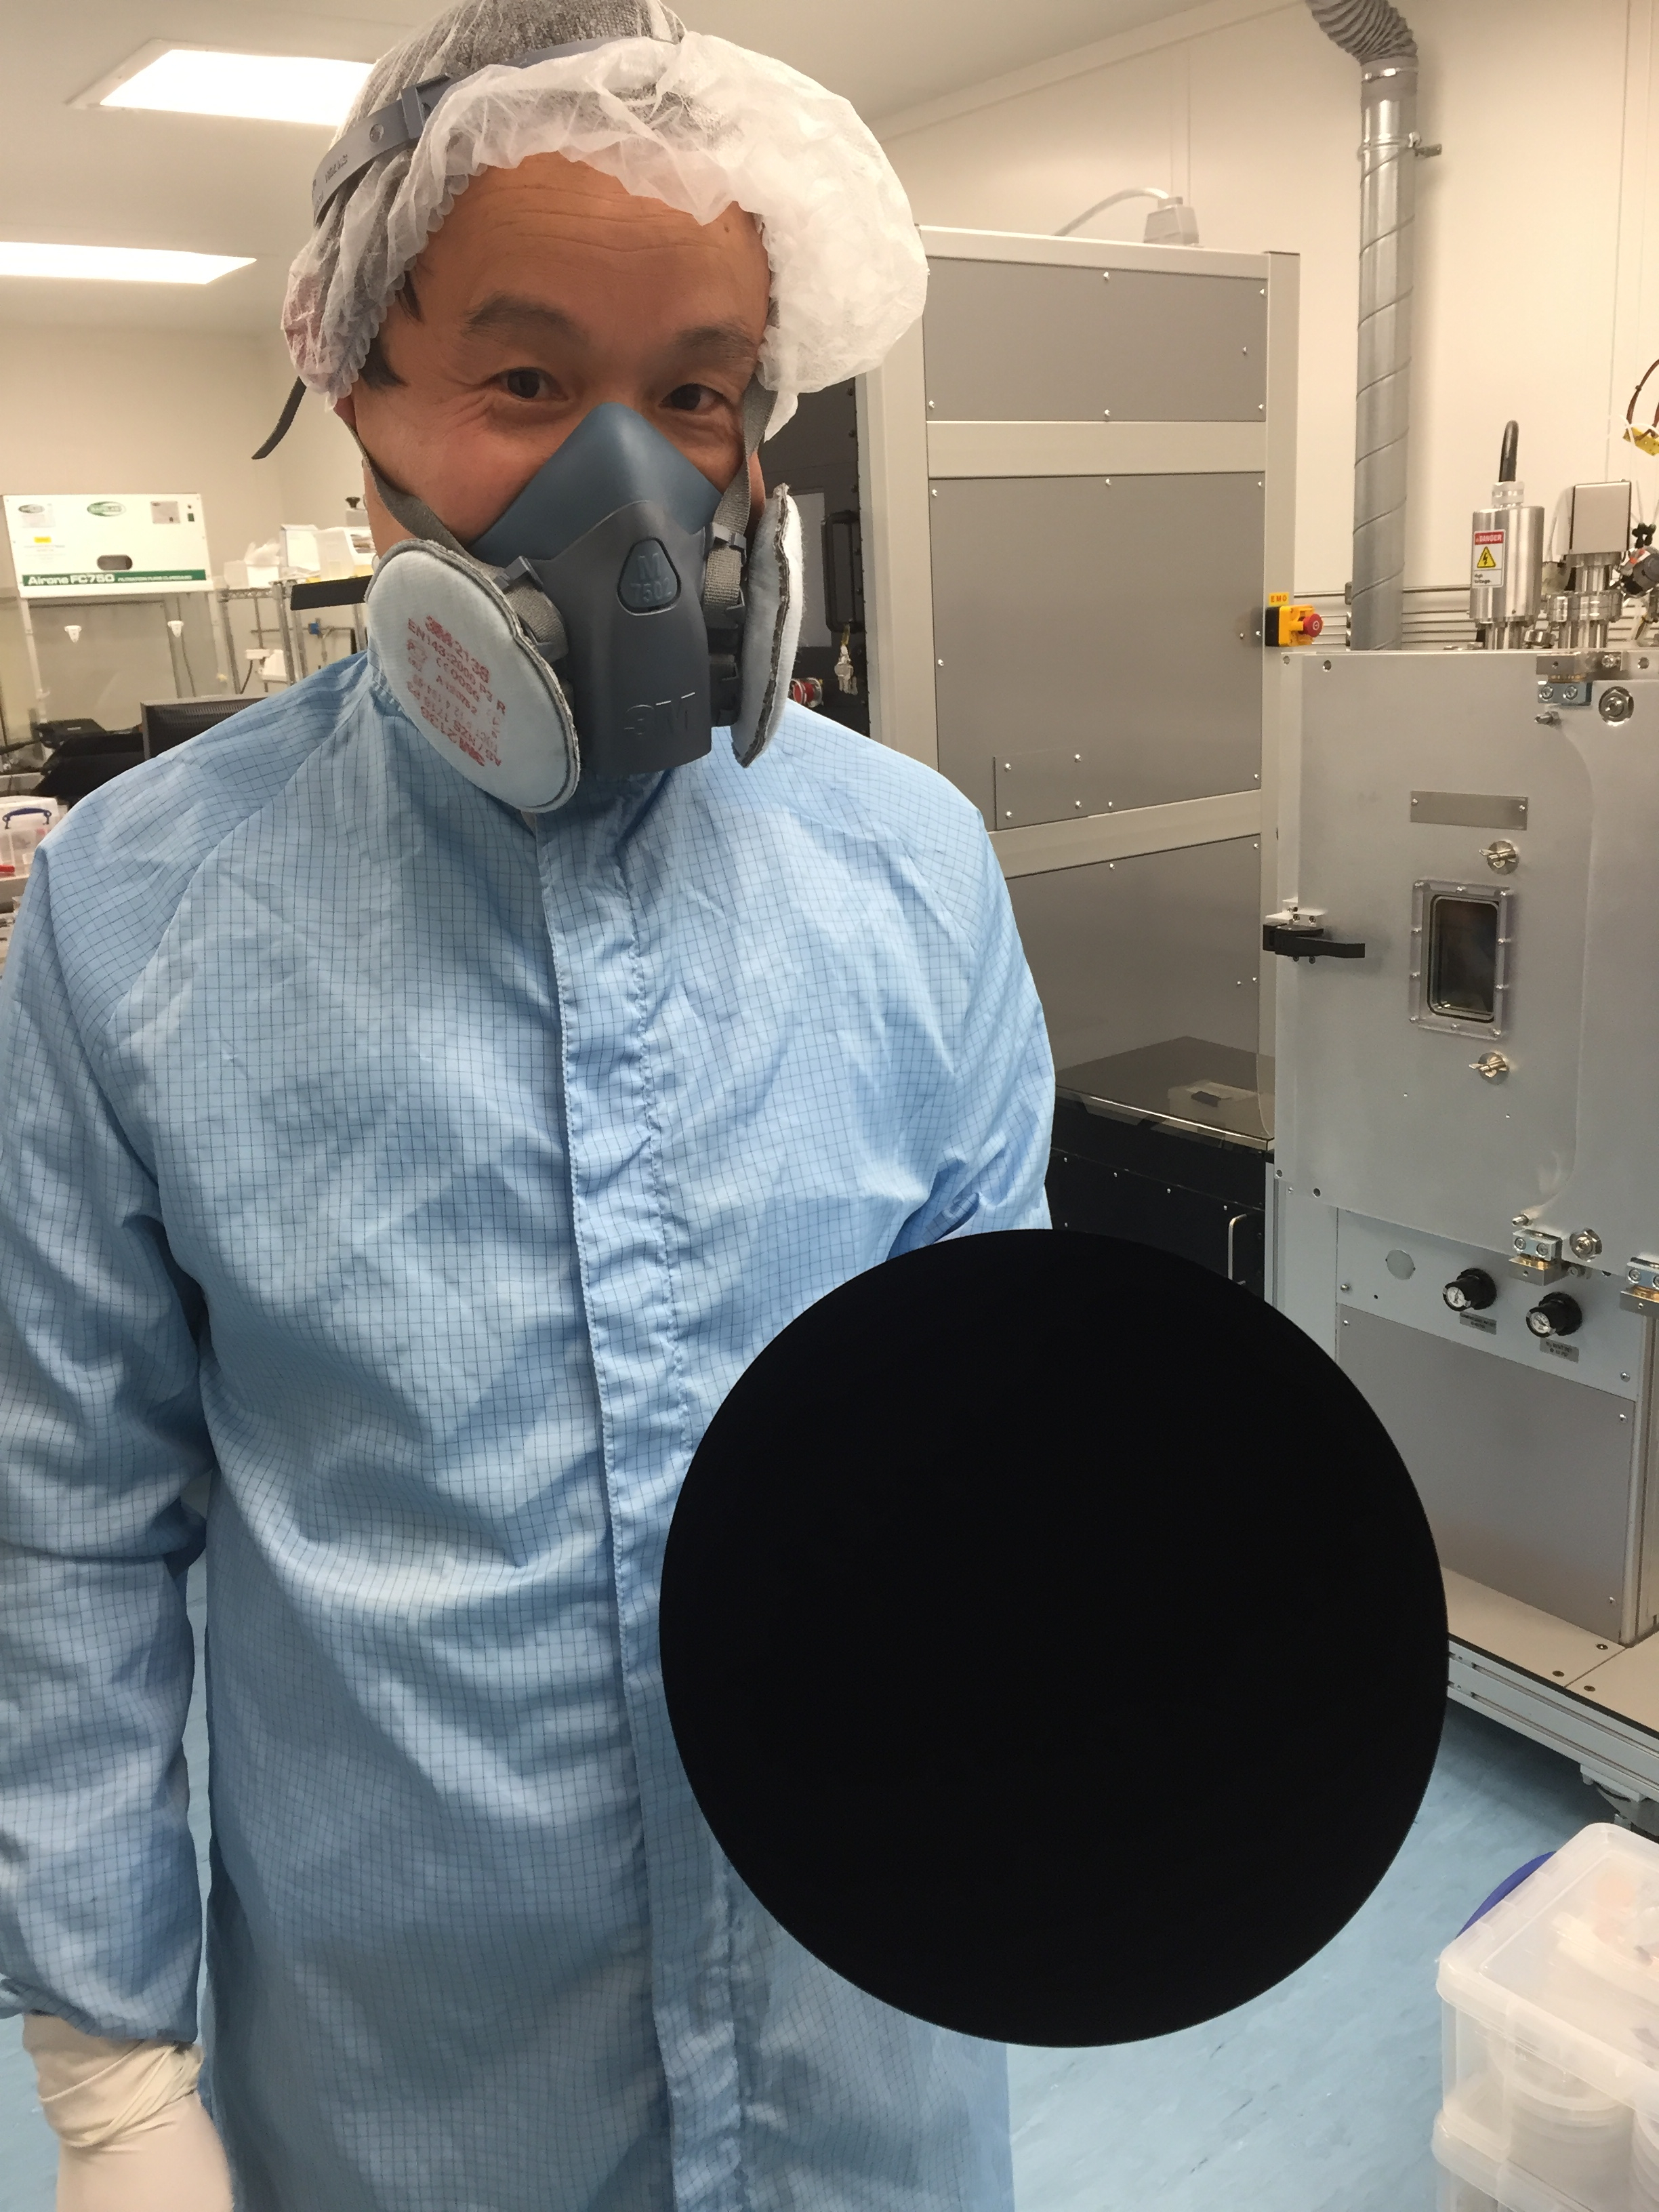 Vantablack Optical Simulation: From Space to the Road